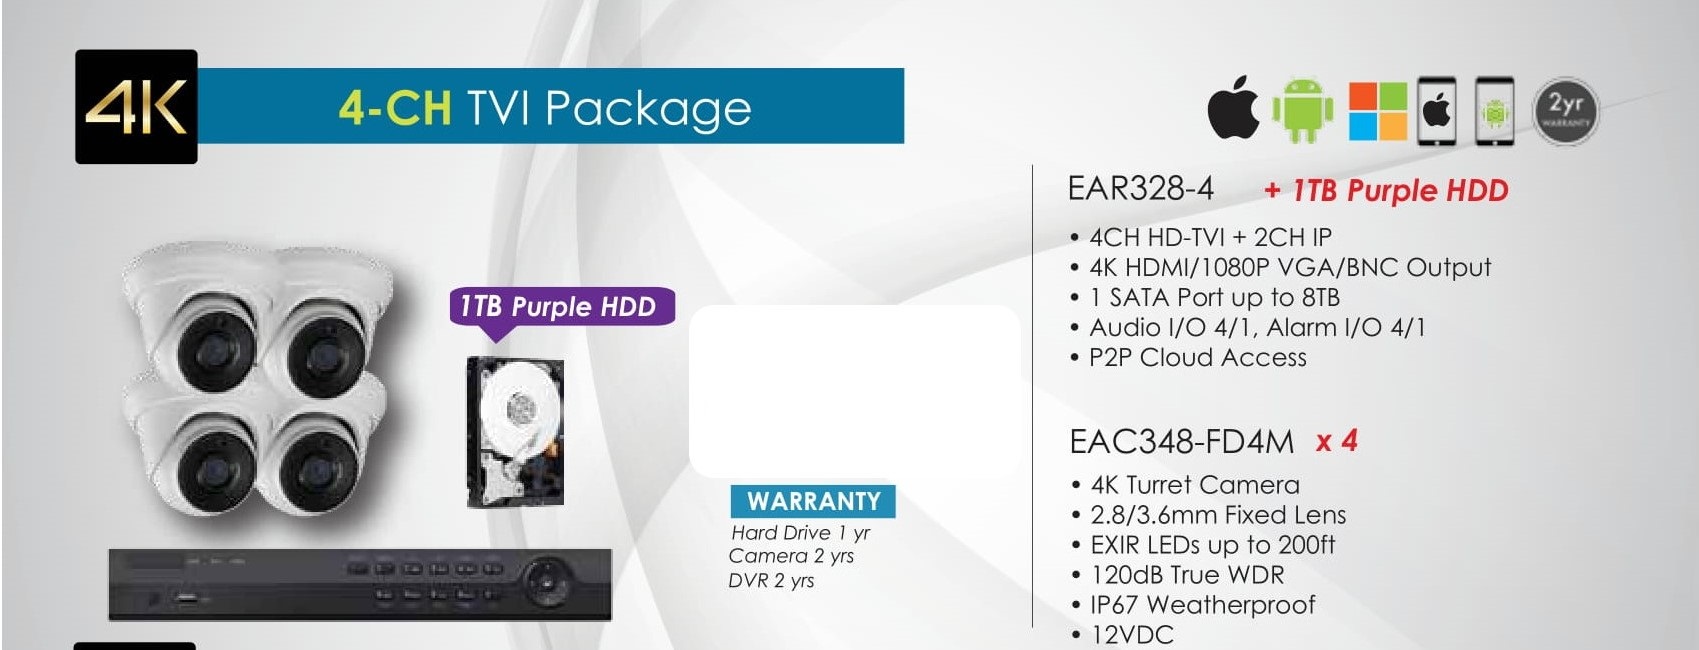 4k-4ch-pack-1 New Packages - No Price